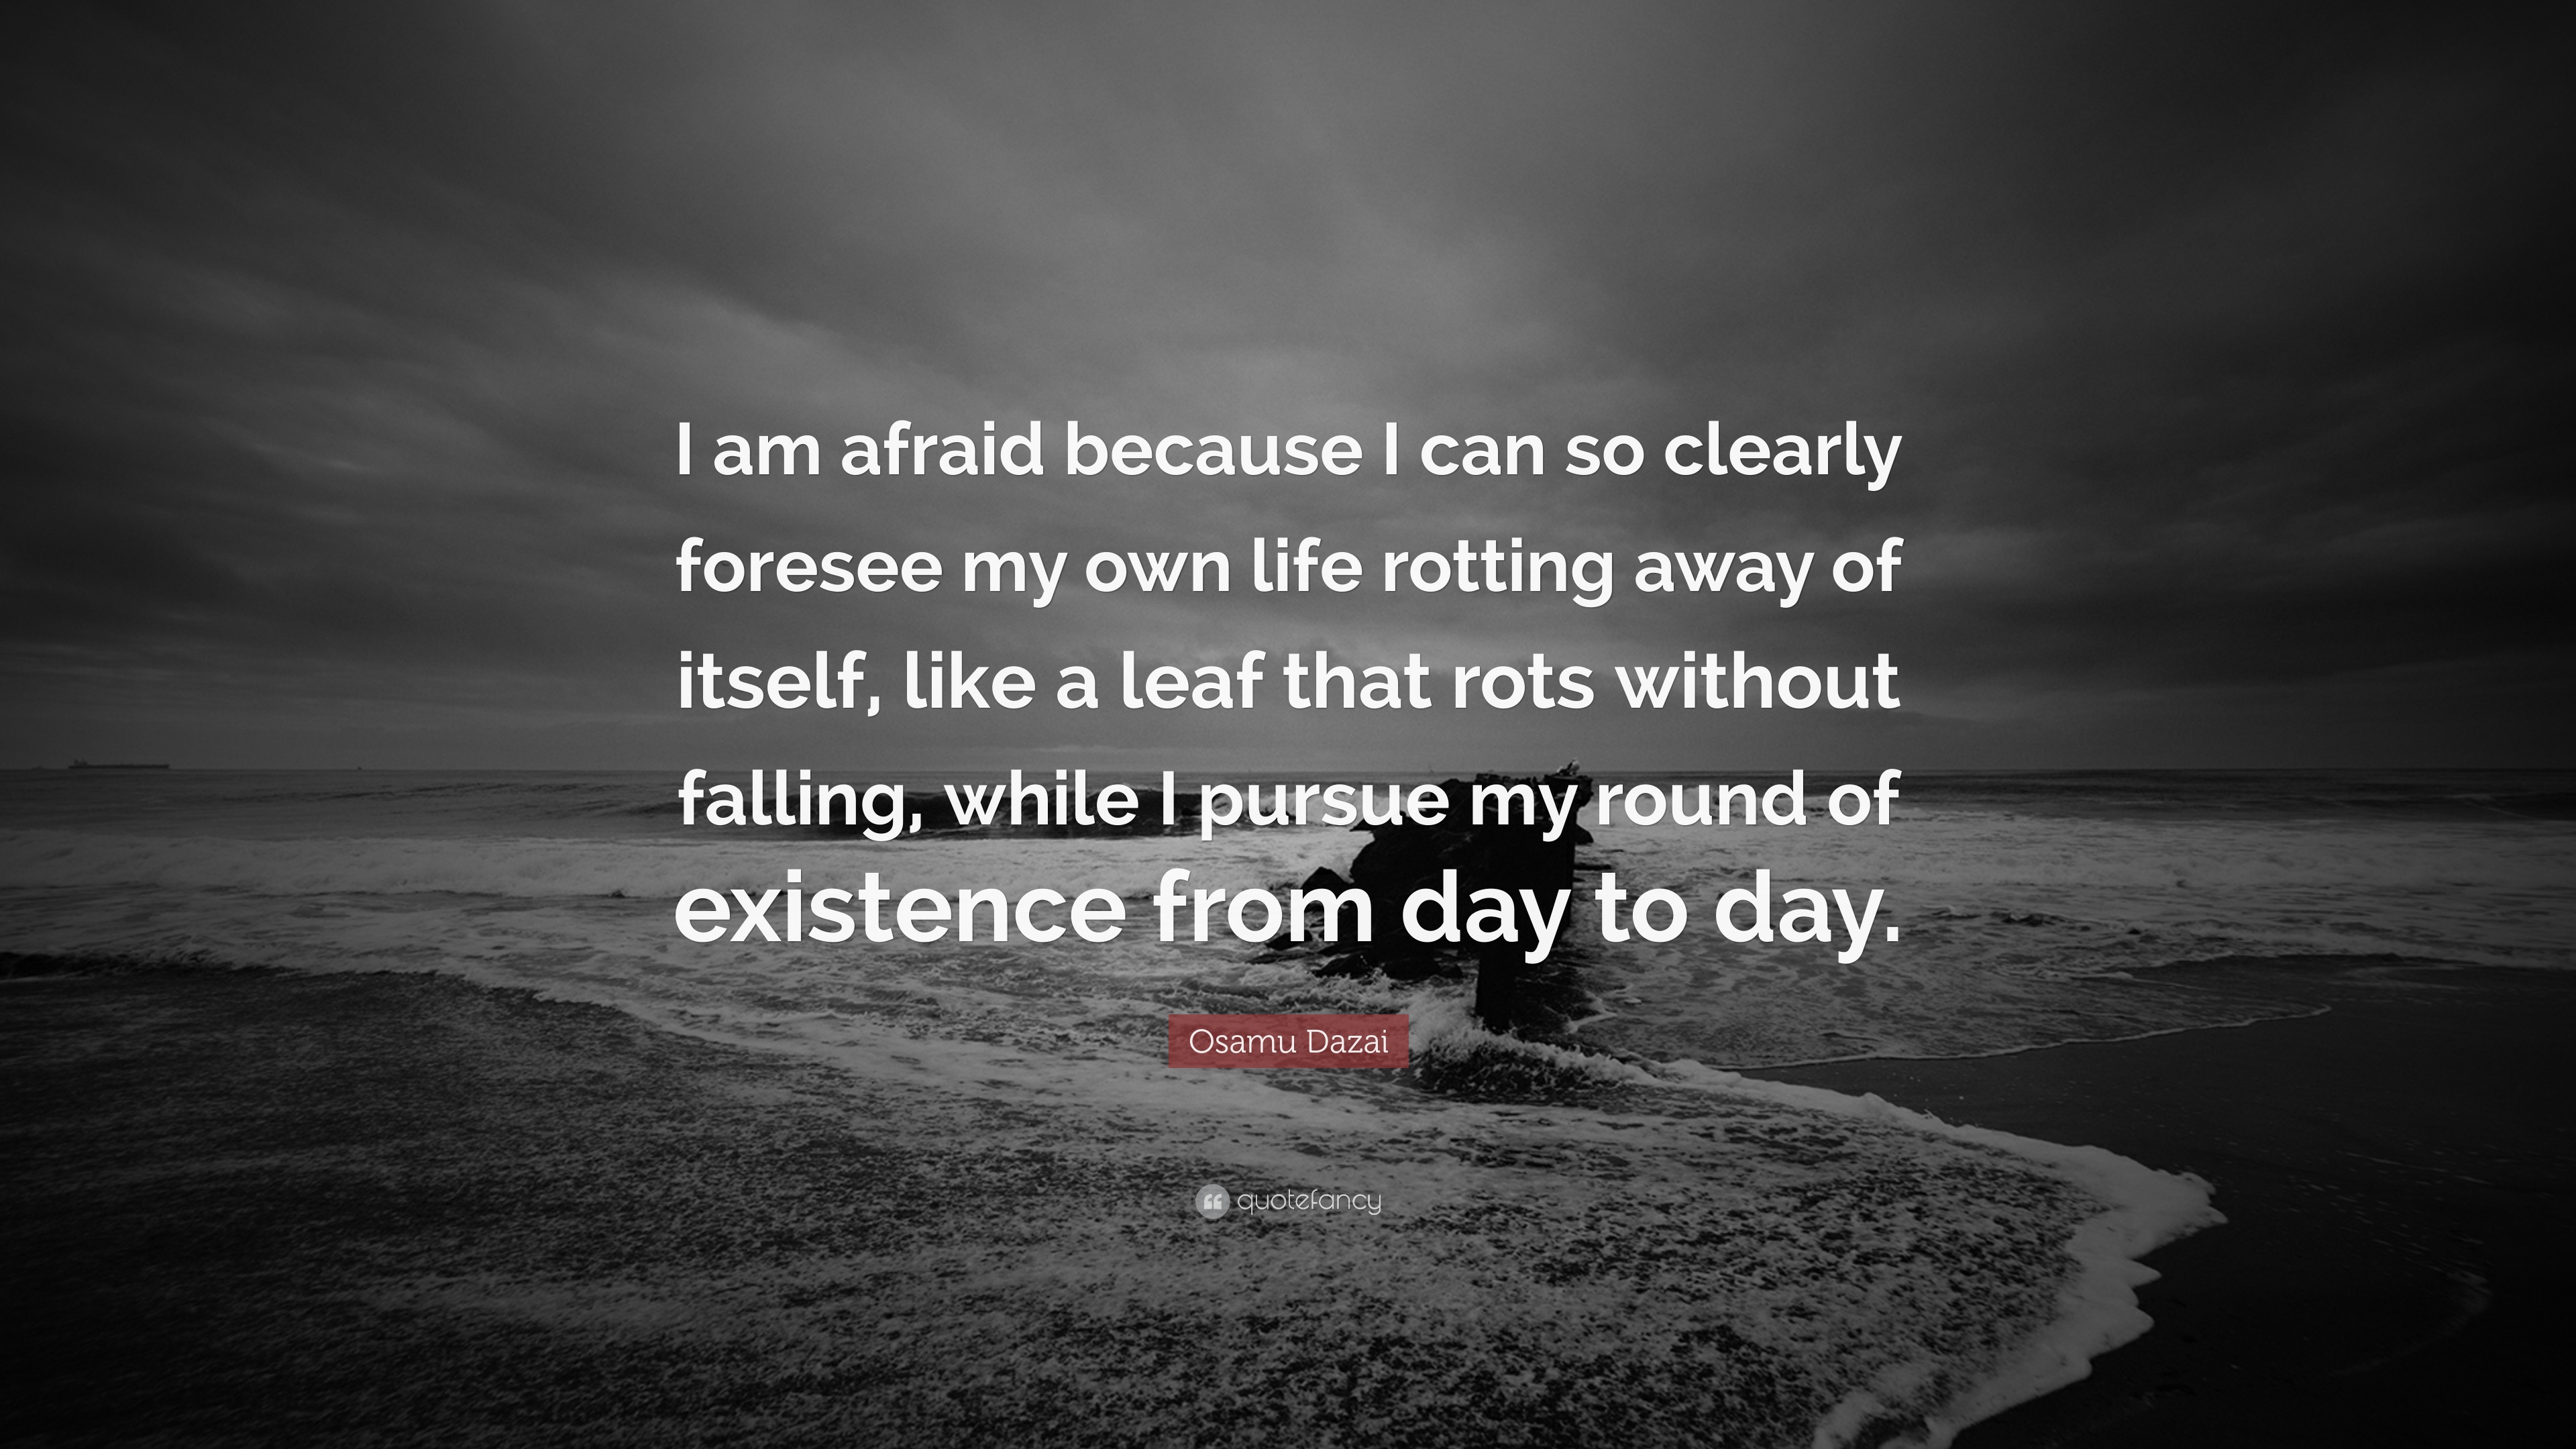 Osamu Dazai Quote: “I am afraid because I can so clearly foresee my own ...